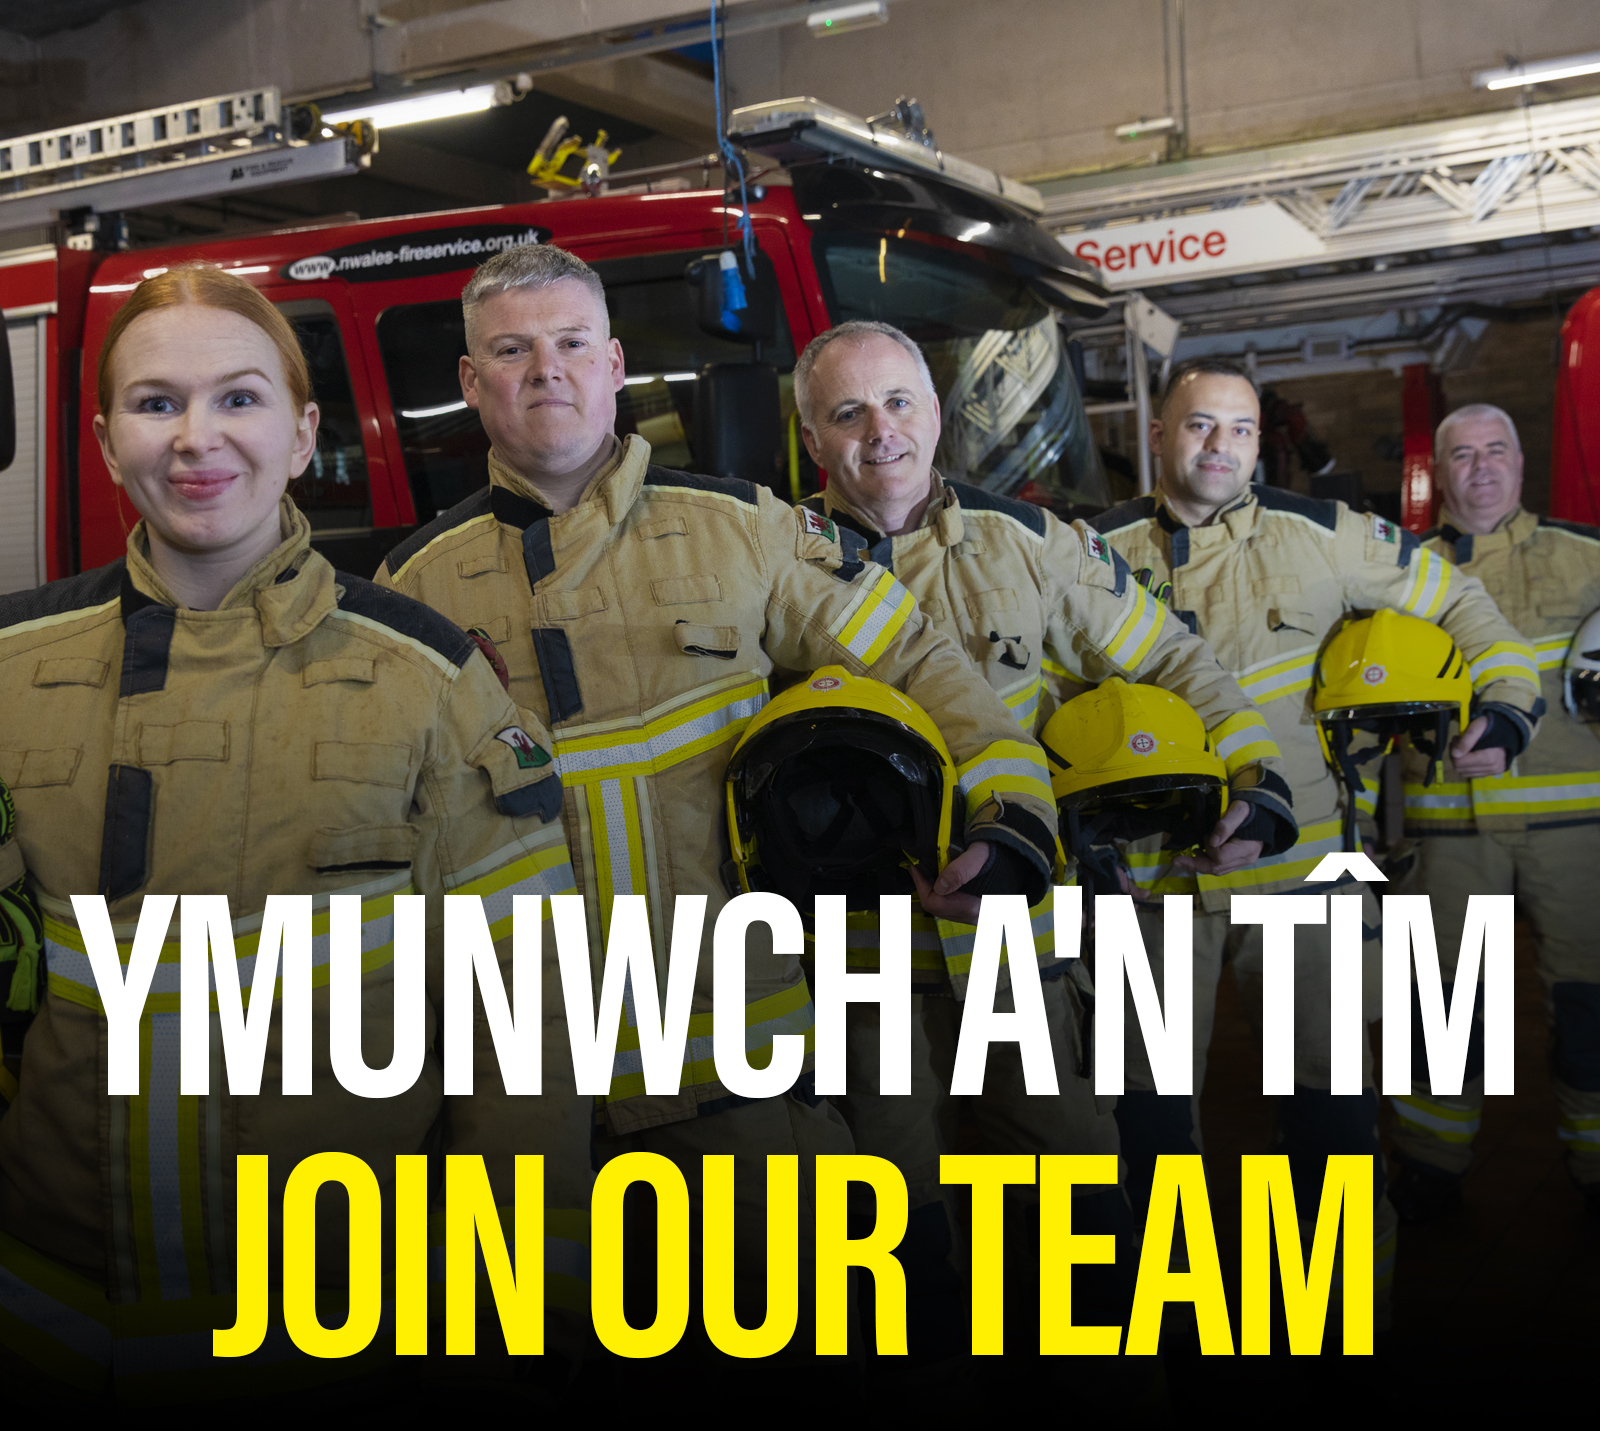 Recruitment drive launched for Full-Time Firefighters